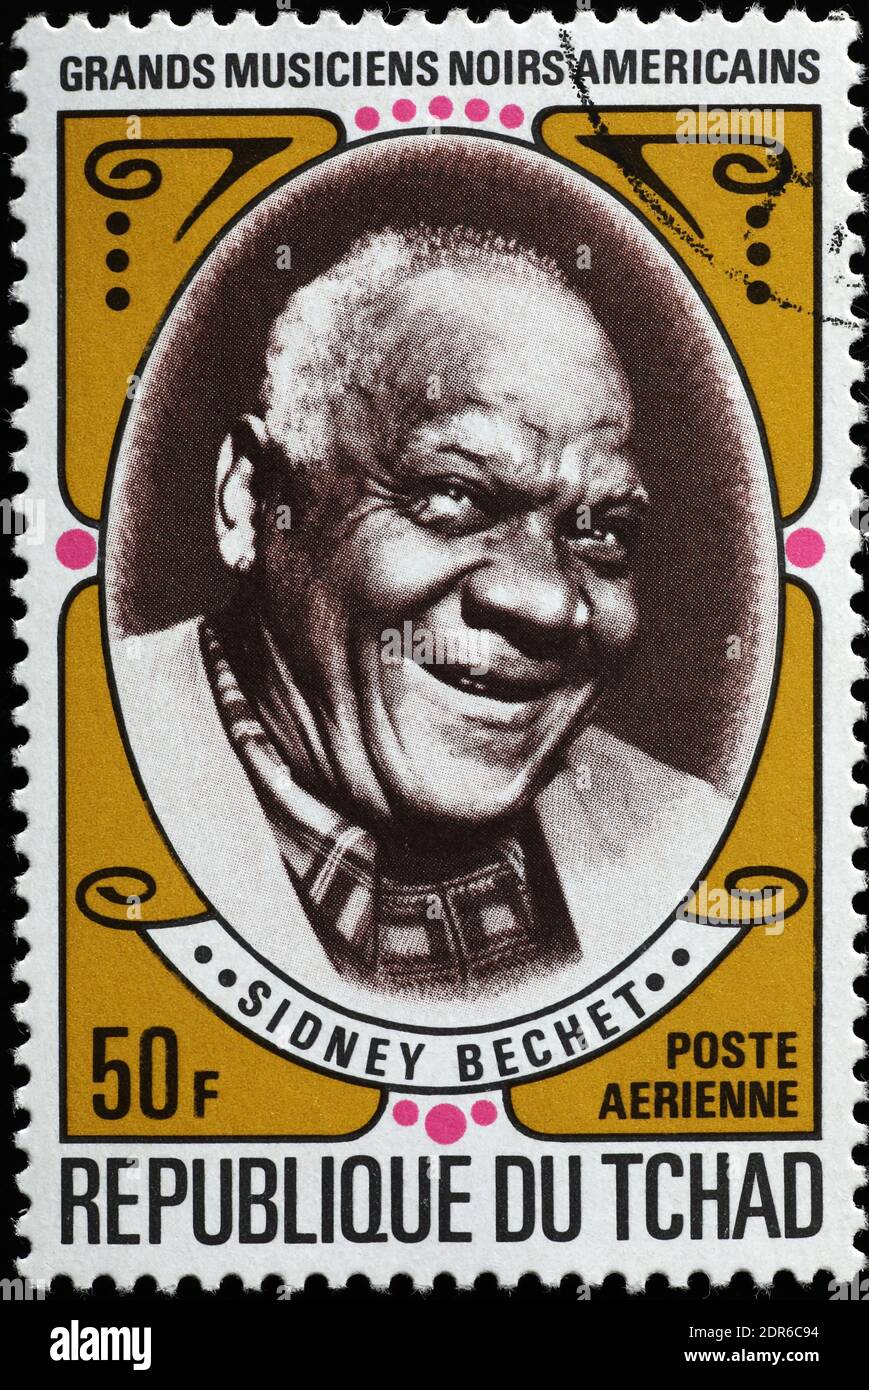 Sidney Bechet on african postage stamp Stock Photo